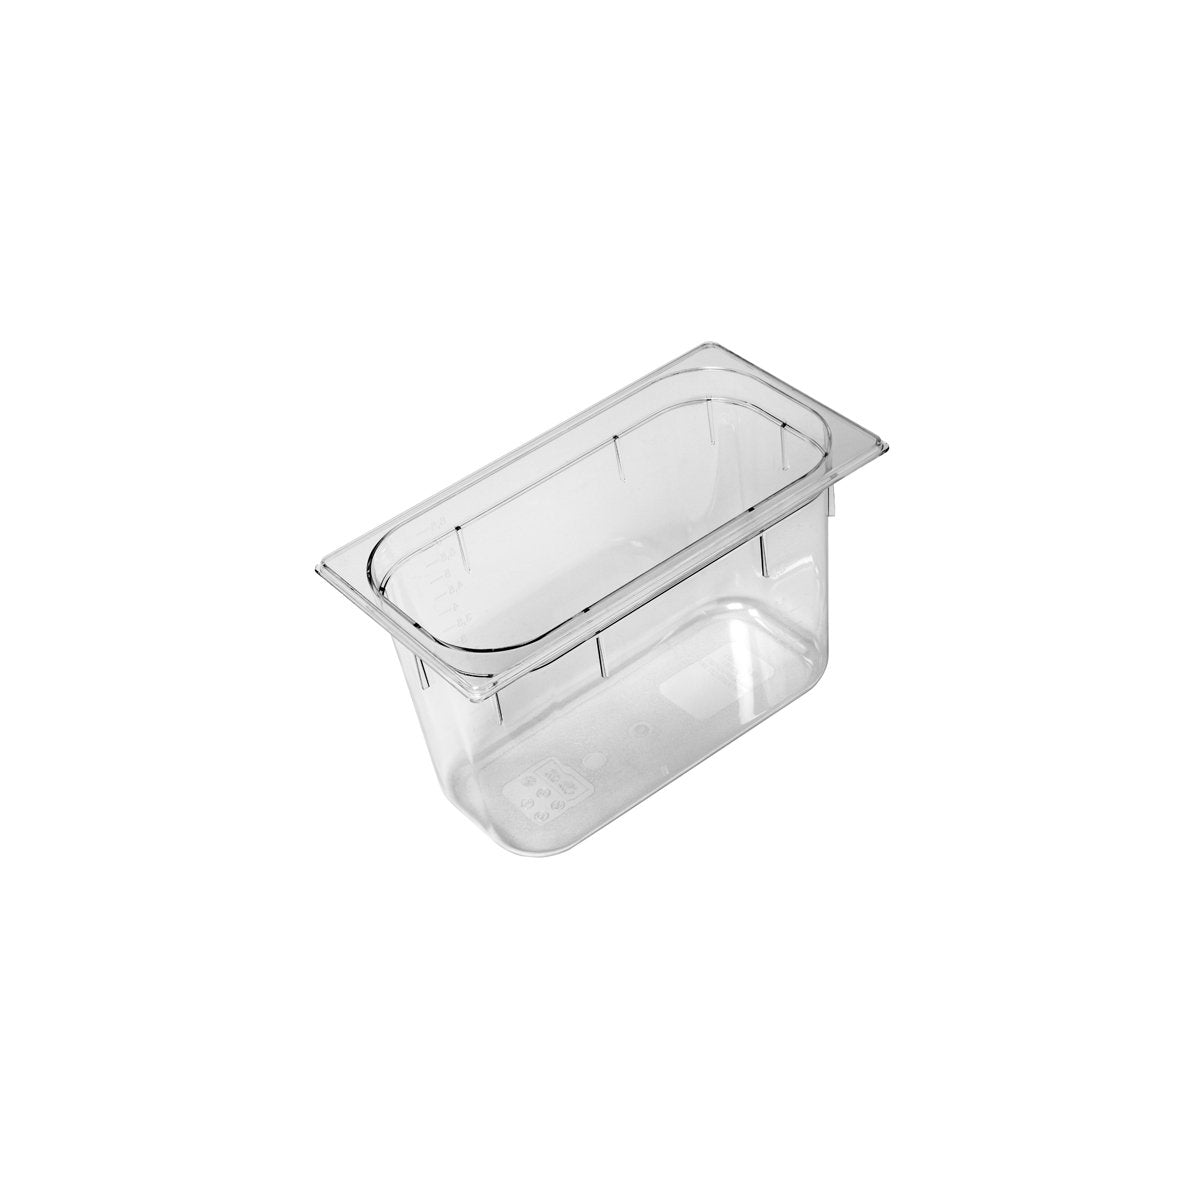 PC-13200CL Inox Macel Gastronorm Pan Polycarbonate Clear 1/3 Size 200mm Tomkin Australia Hospitality Supplies